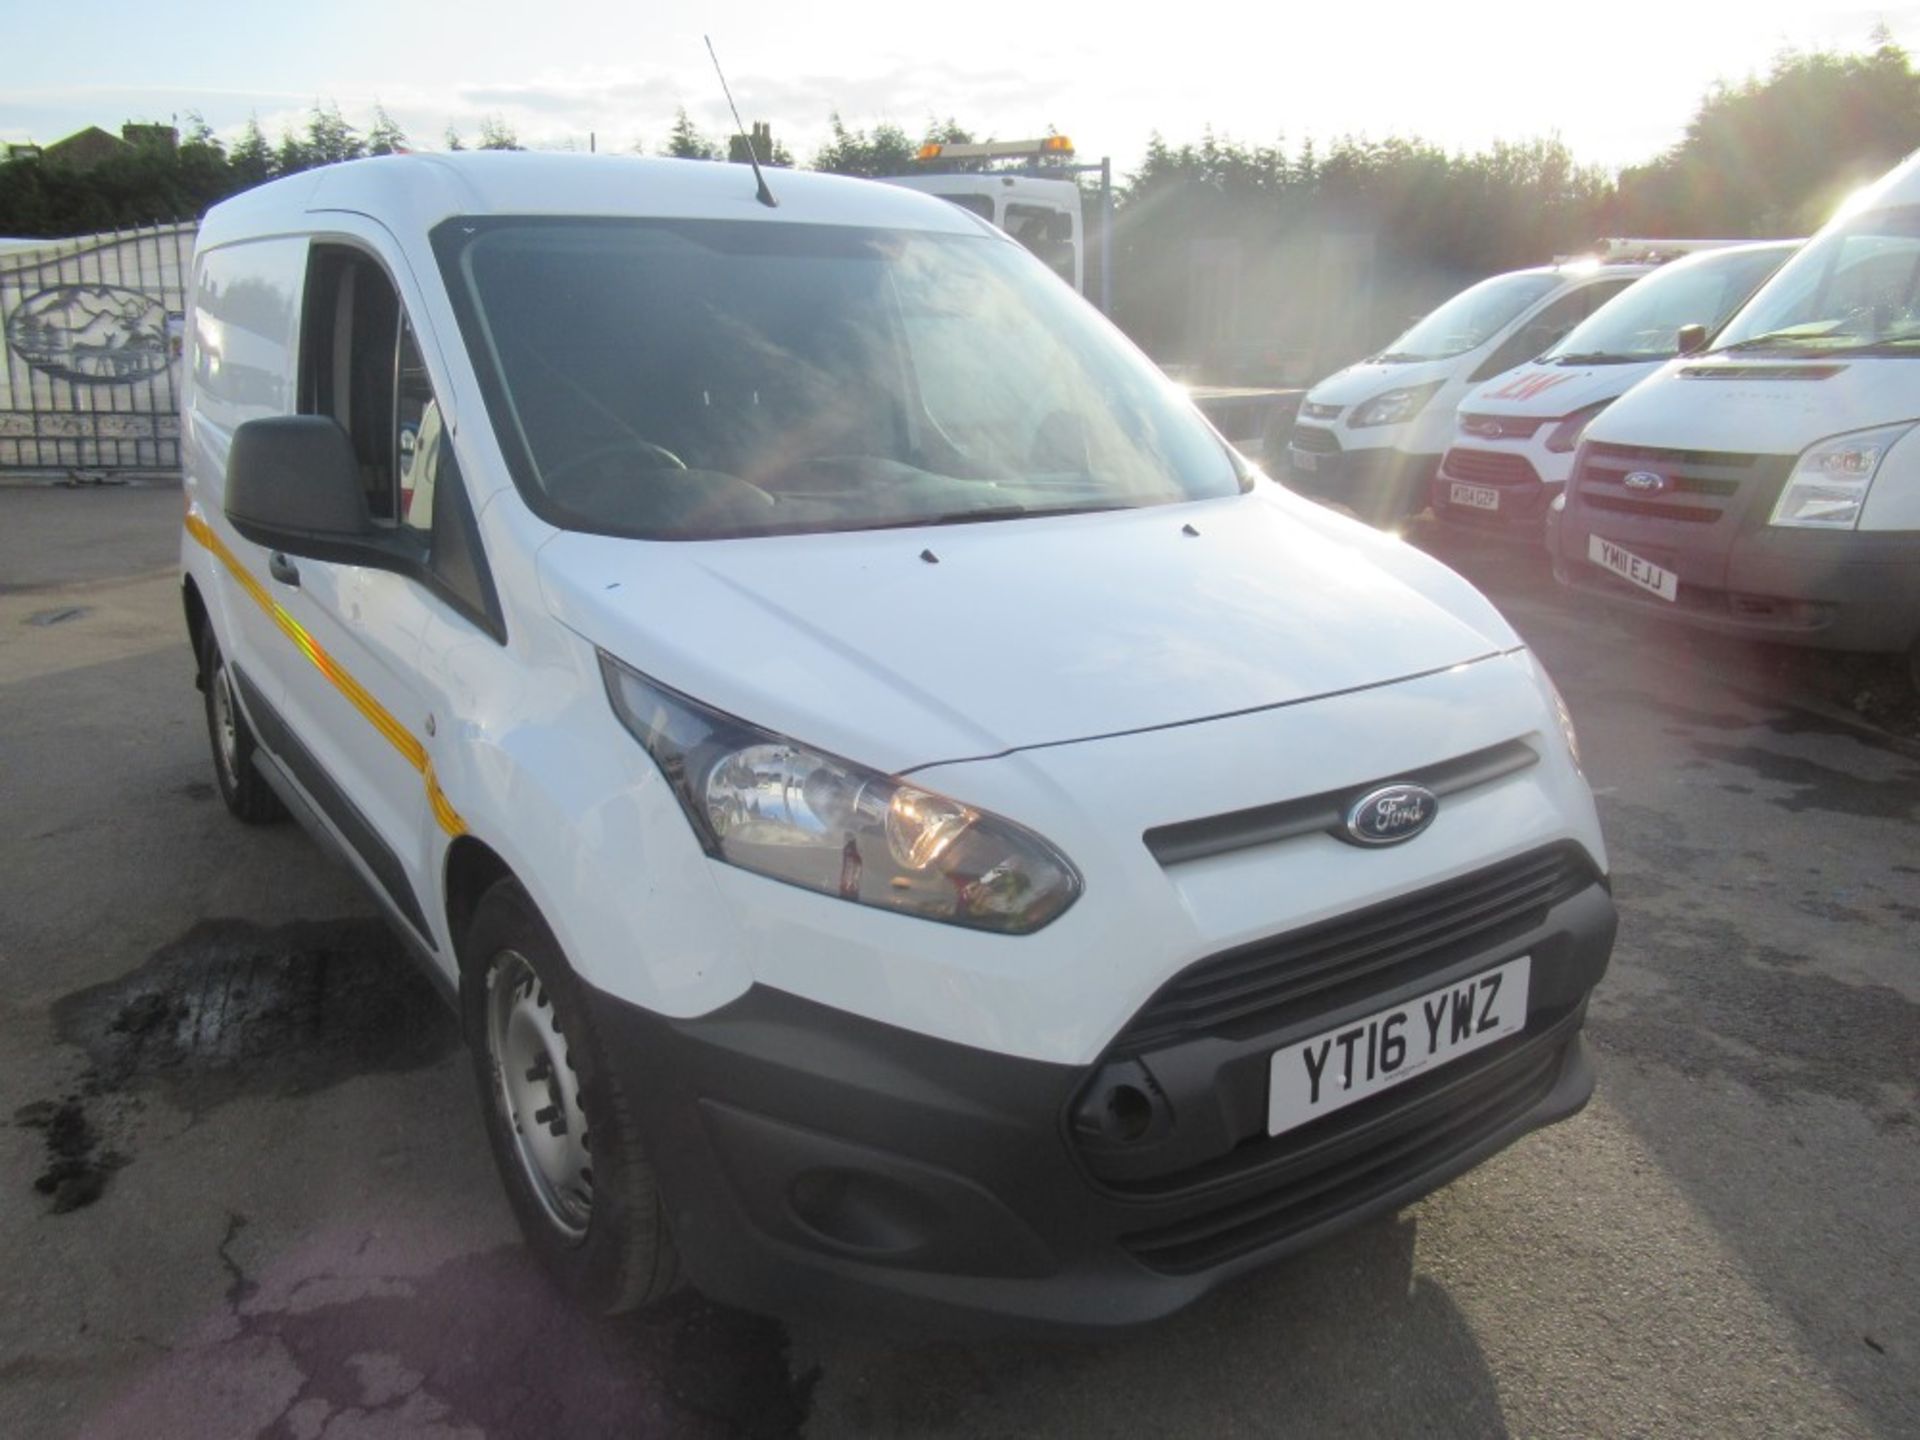 16 reg FORD TRANSIT CONNECT 200, 1ST REG 03/16, TEST 03/20, 105393M WARRANTED, V5 HERE, 1 OWNER FROM